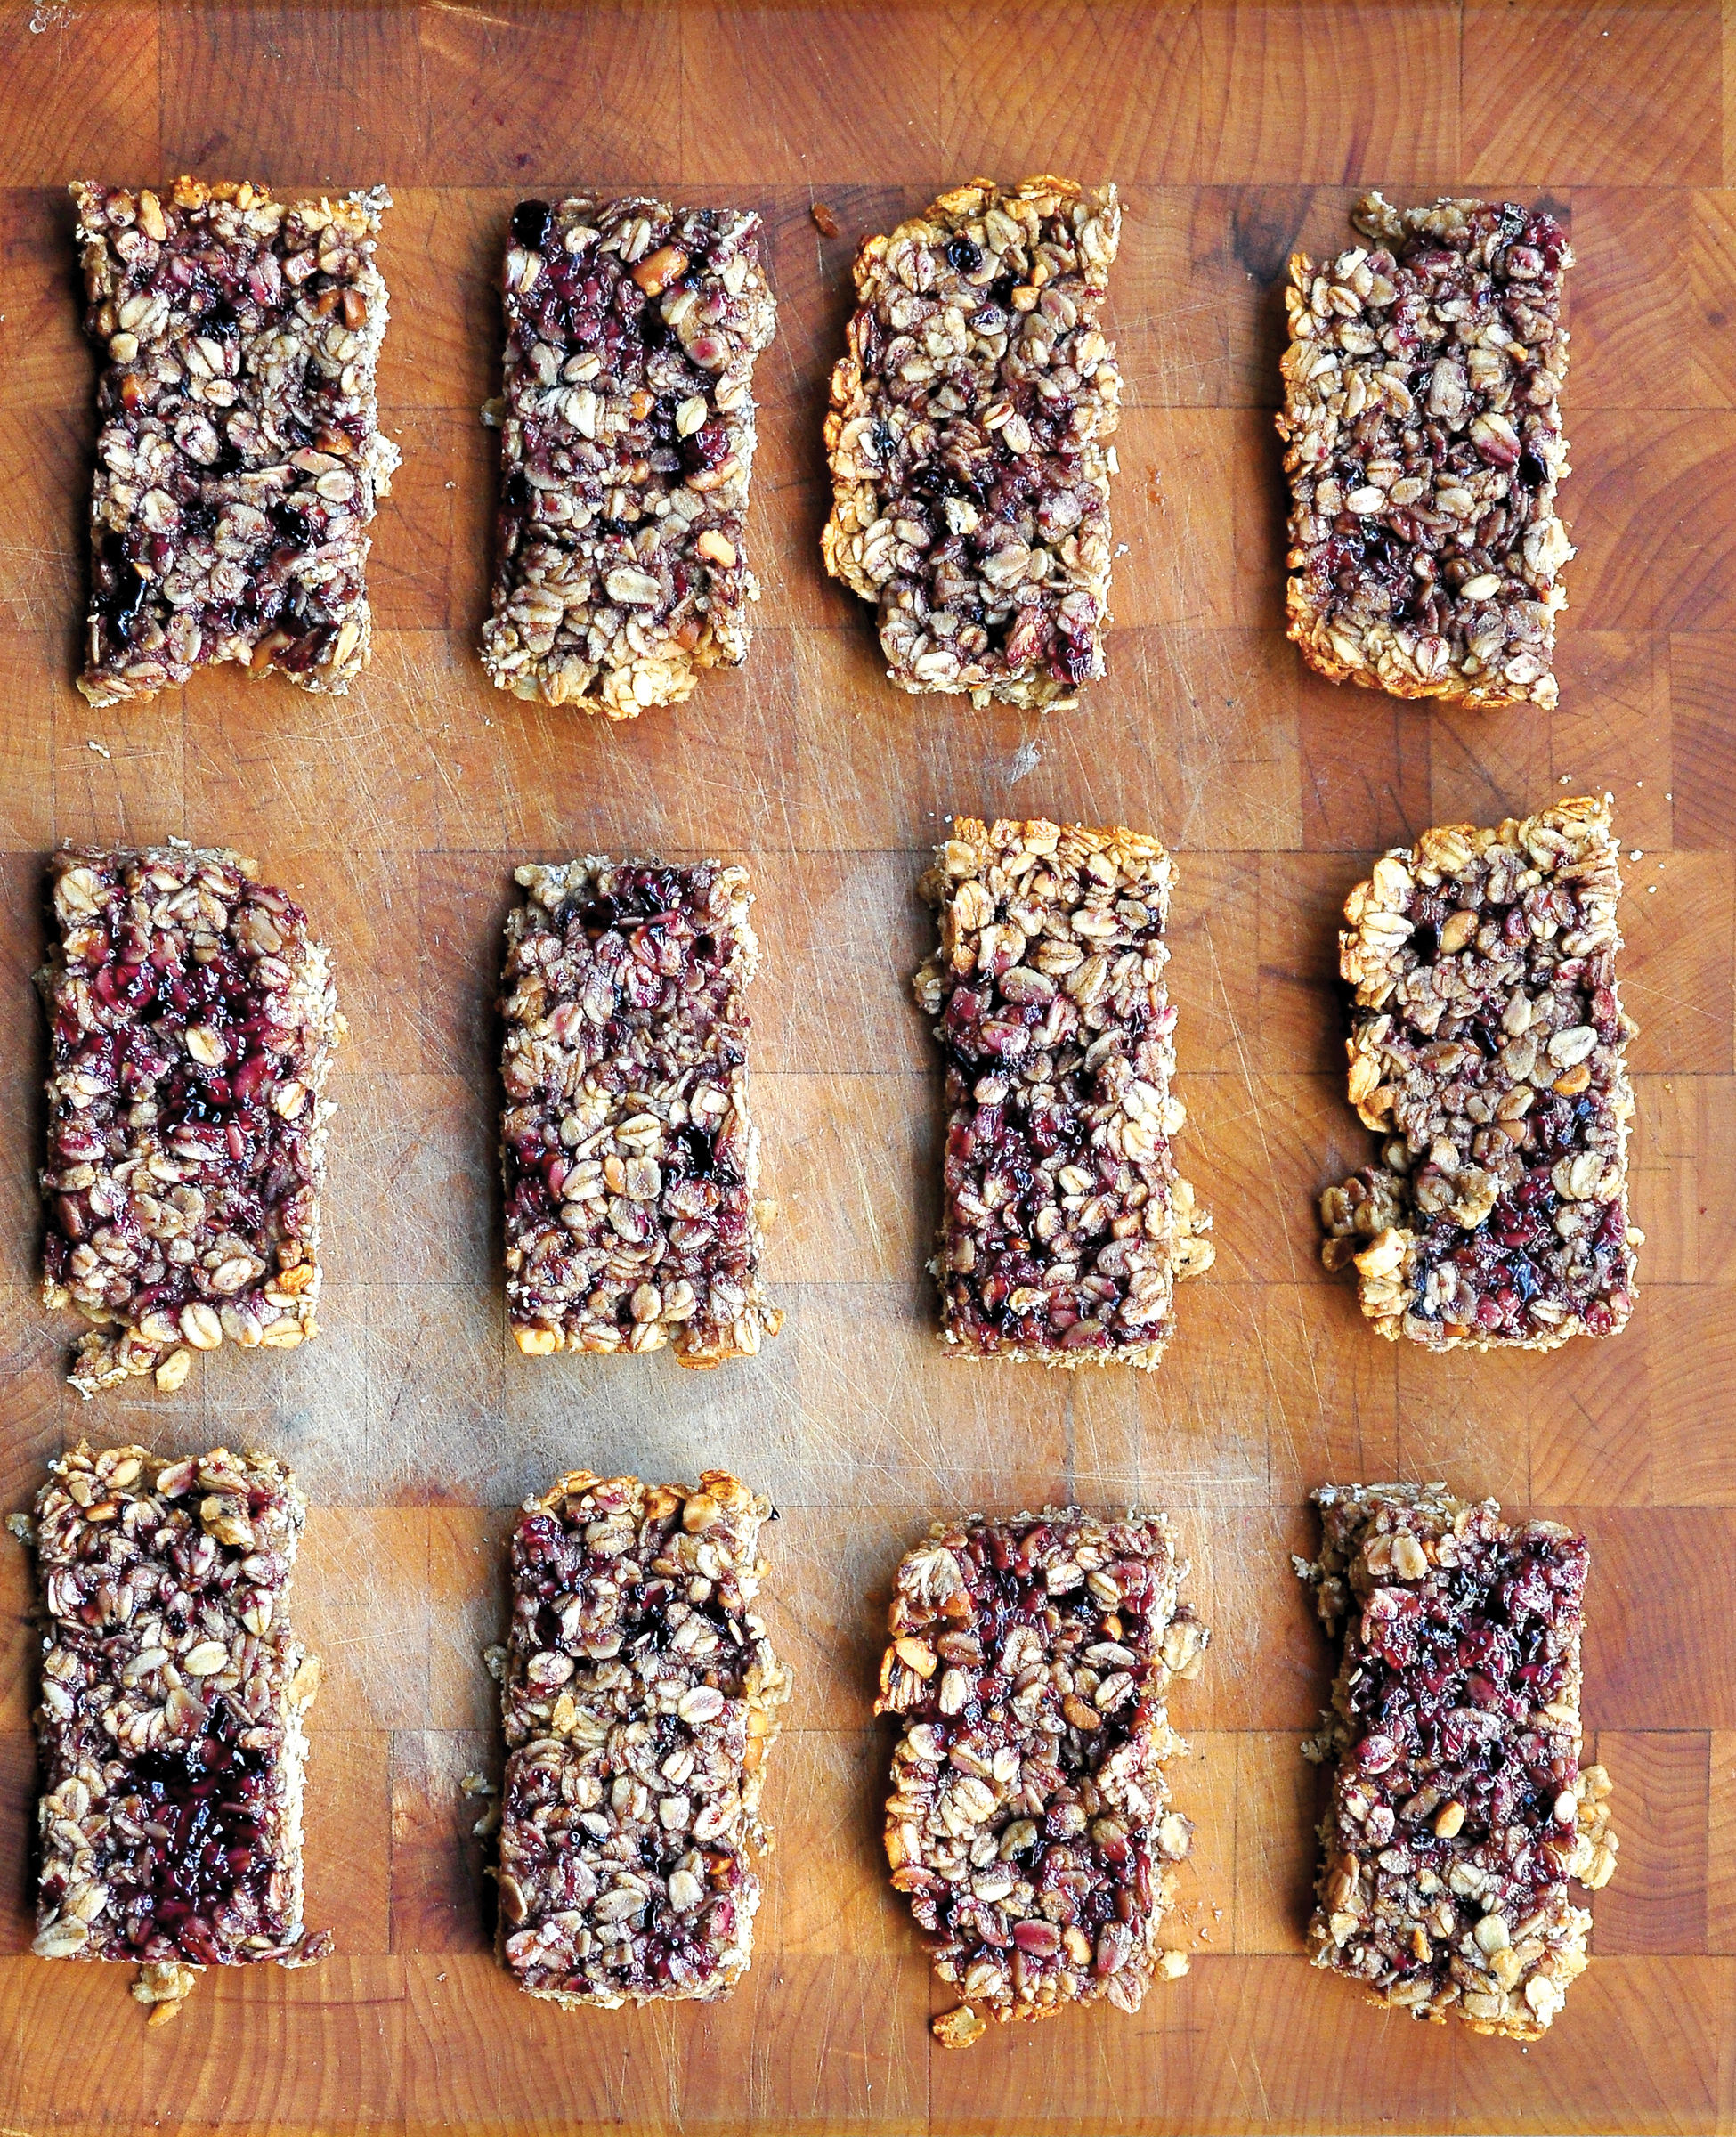 Peanut Butter and Jelly Granola Bars